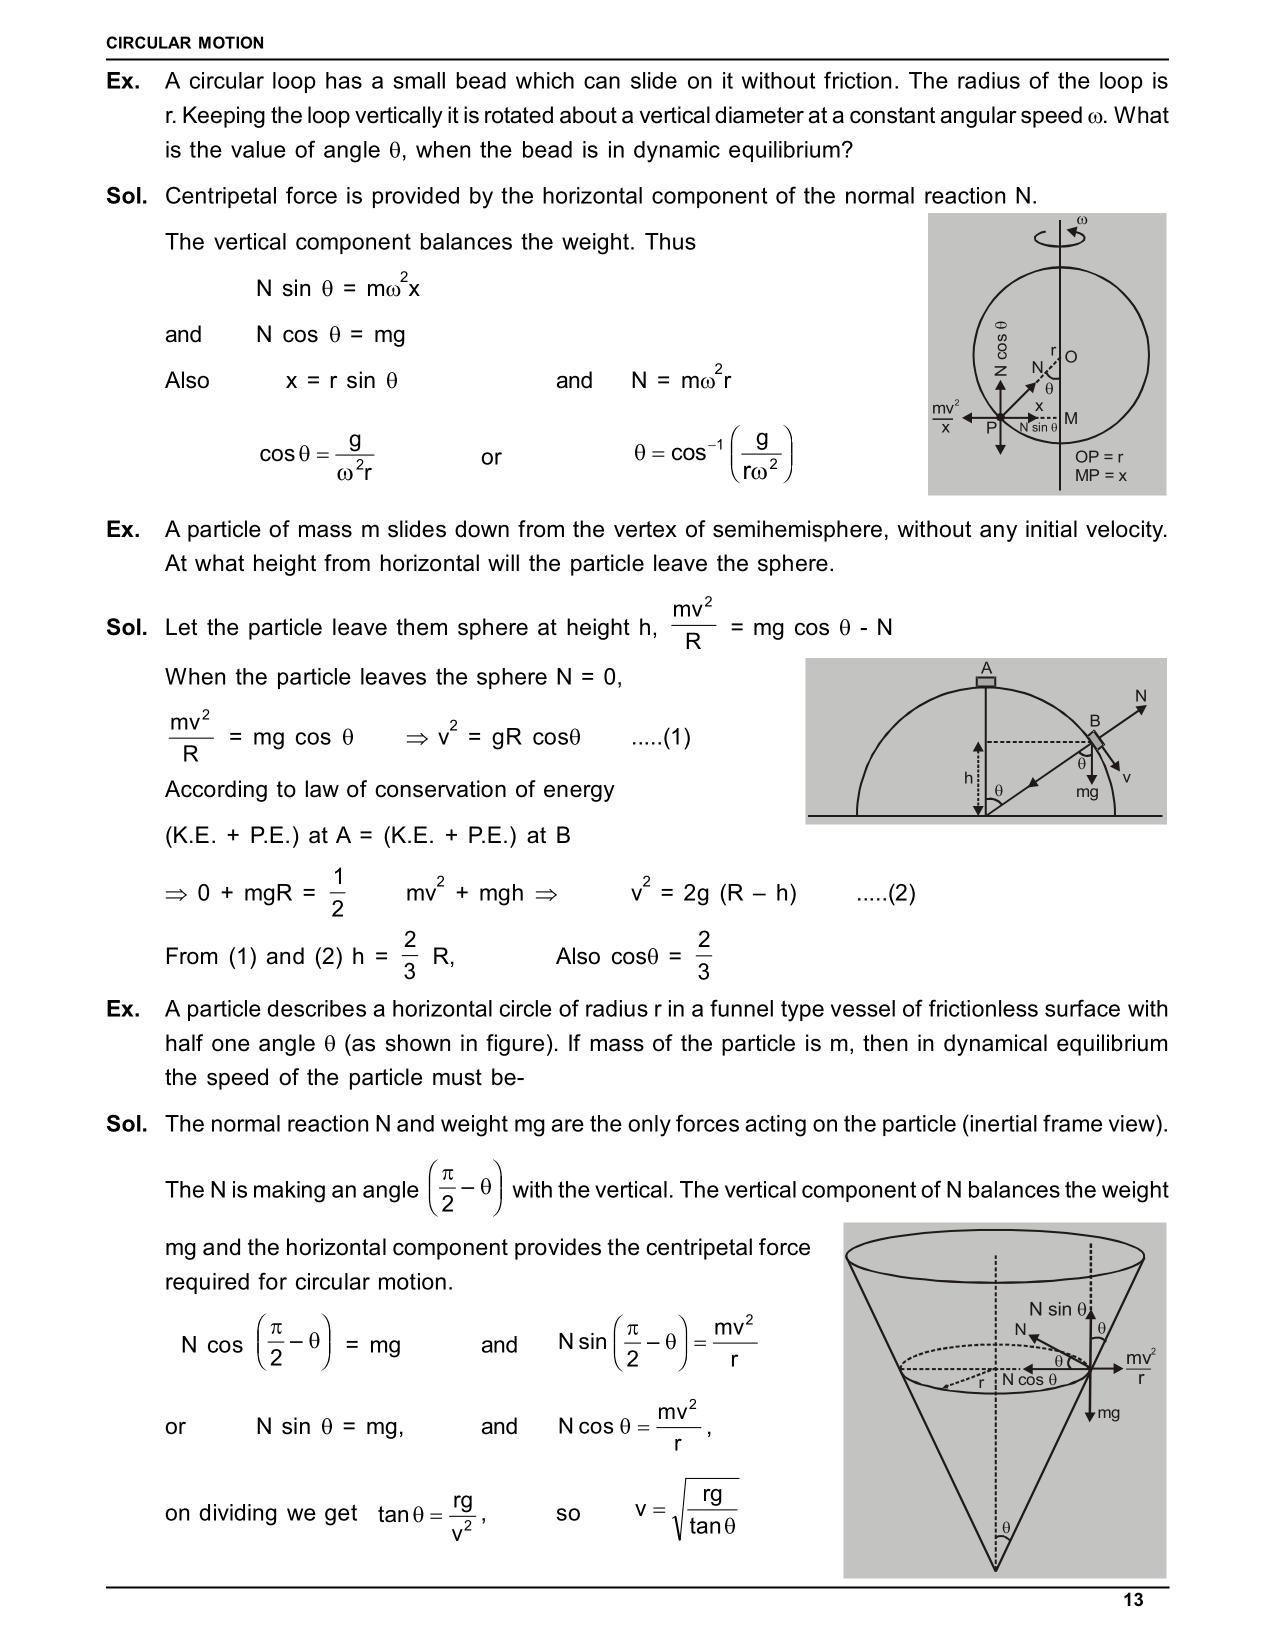 Circular Motion Notes Class 11th - IIT JEE